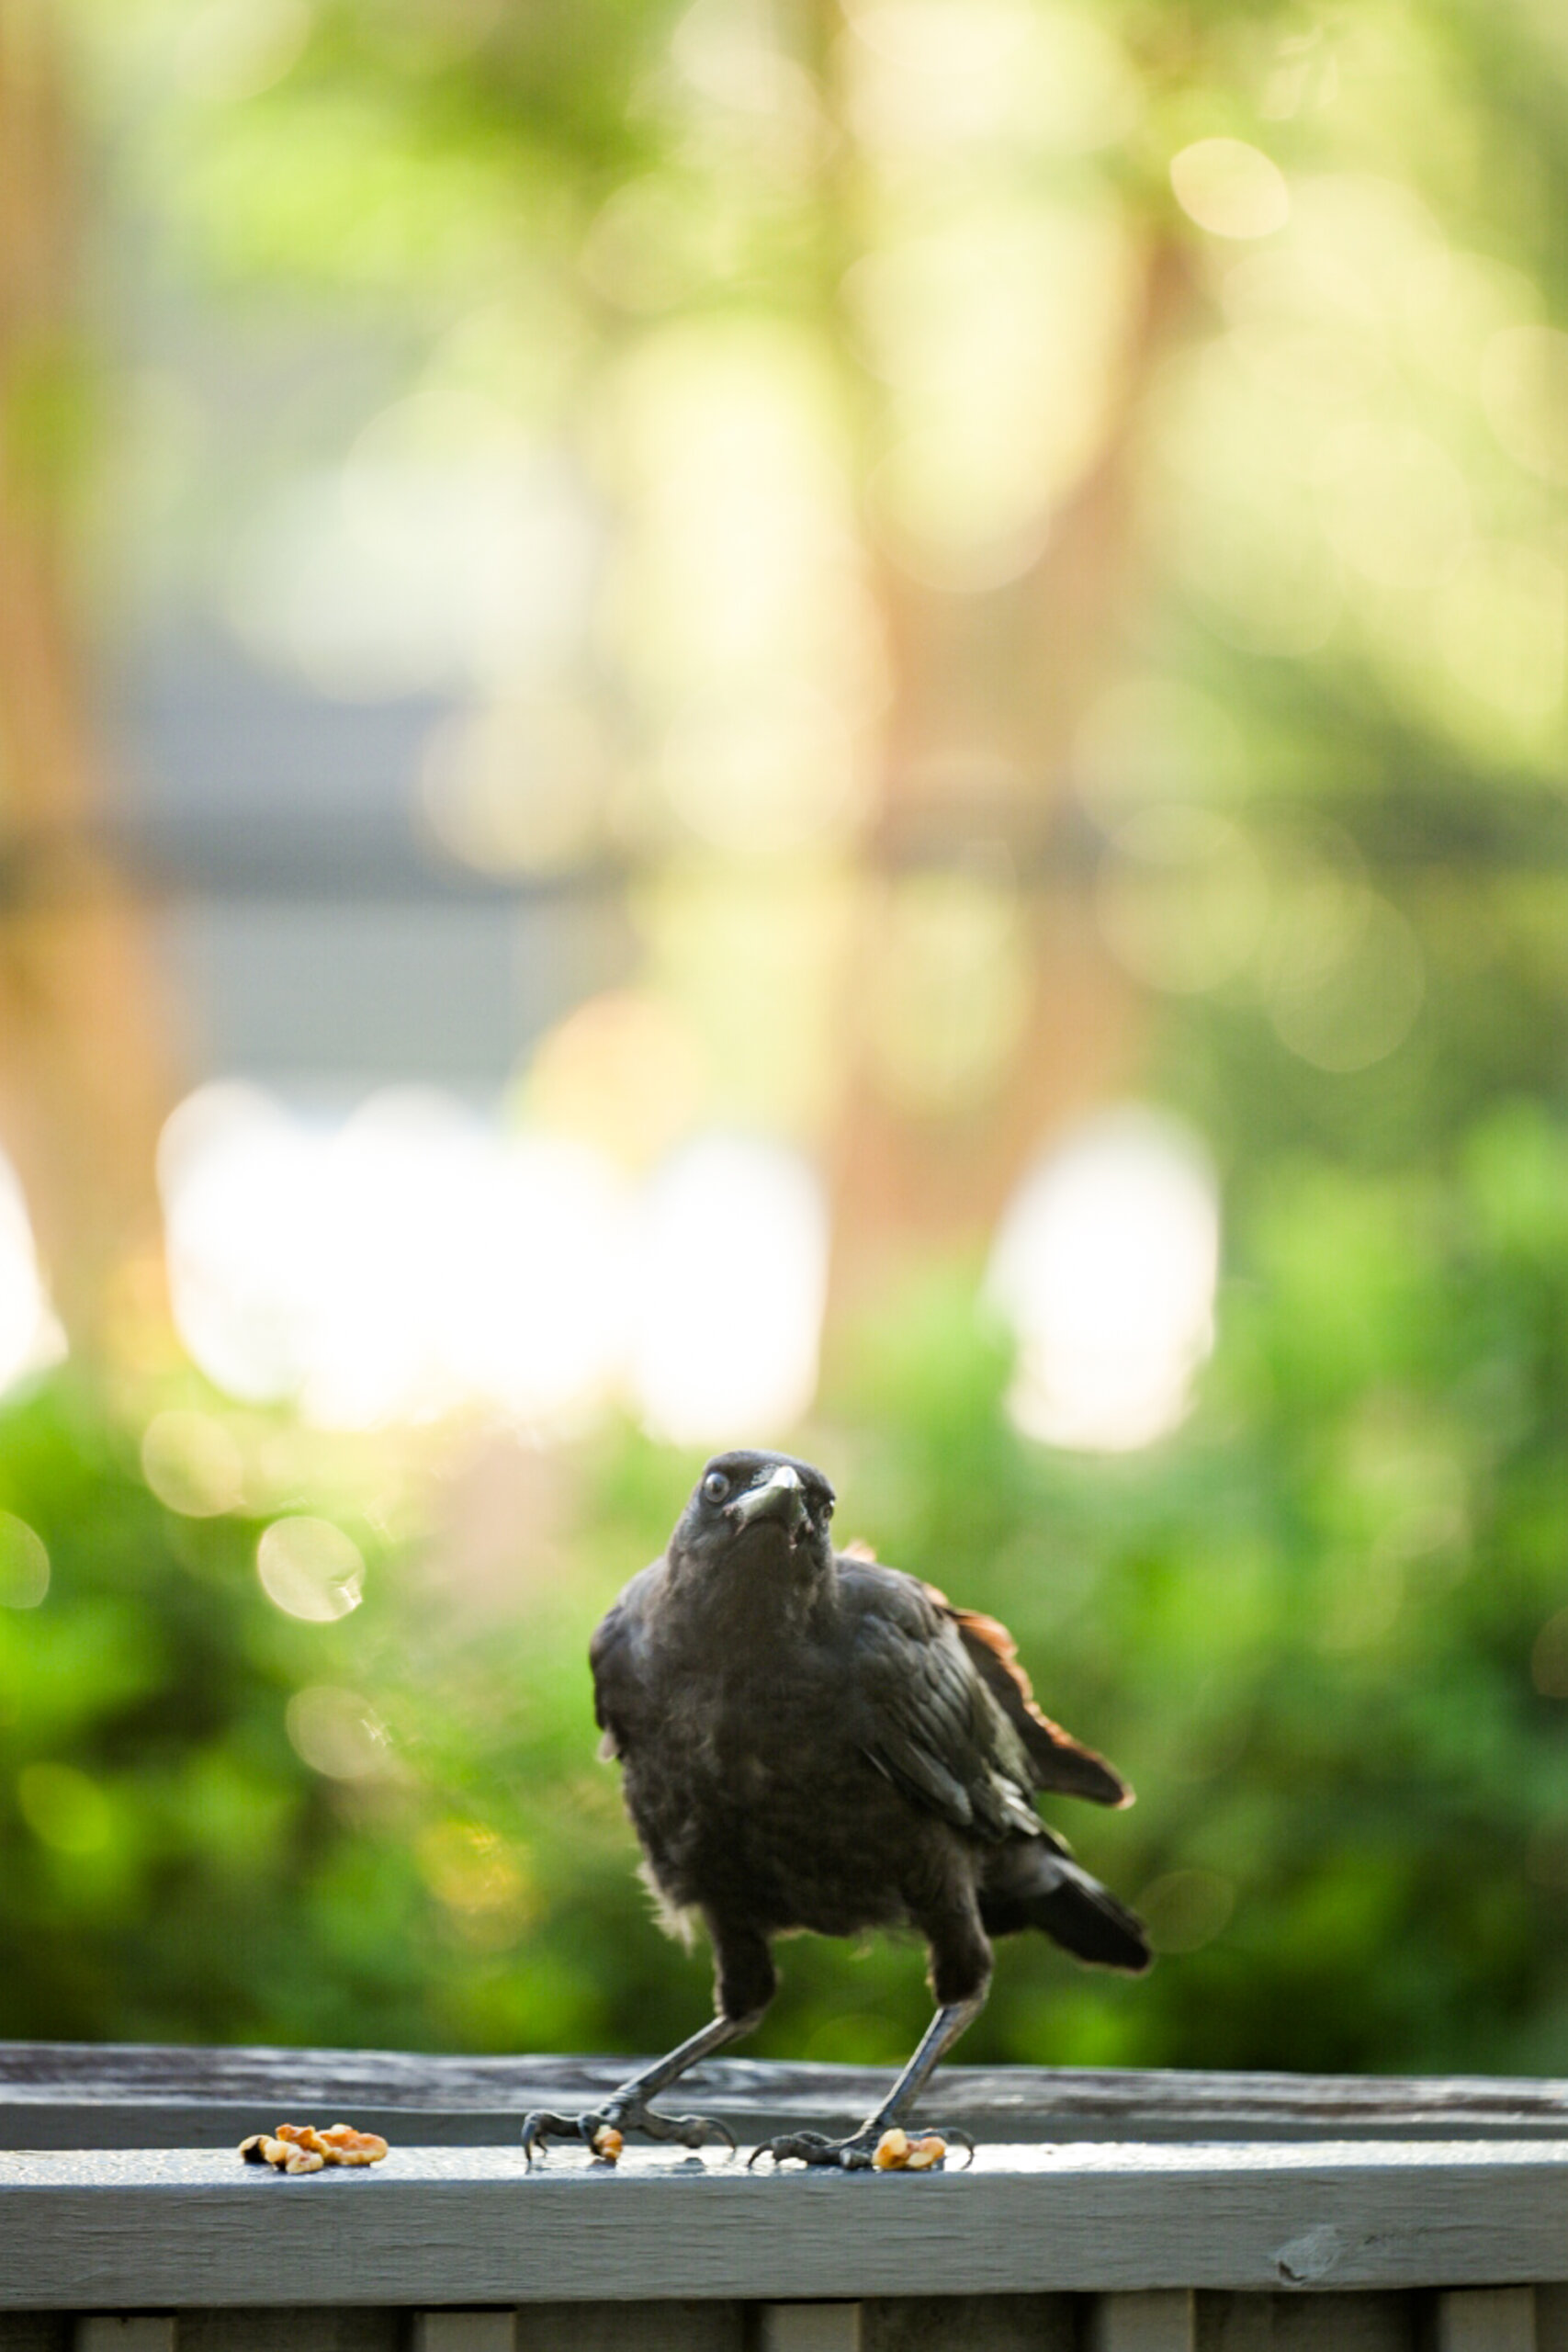 A black bird stands on a wooden surface outdoors. There are small pieces of food scattered around its feet. The background is a bokeh effect of green foliage and blurred light.